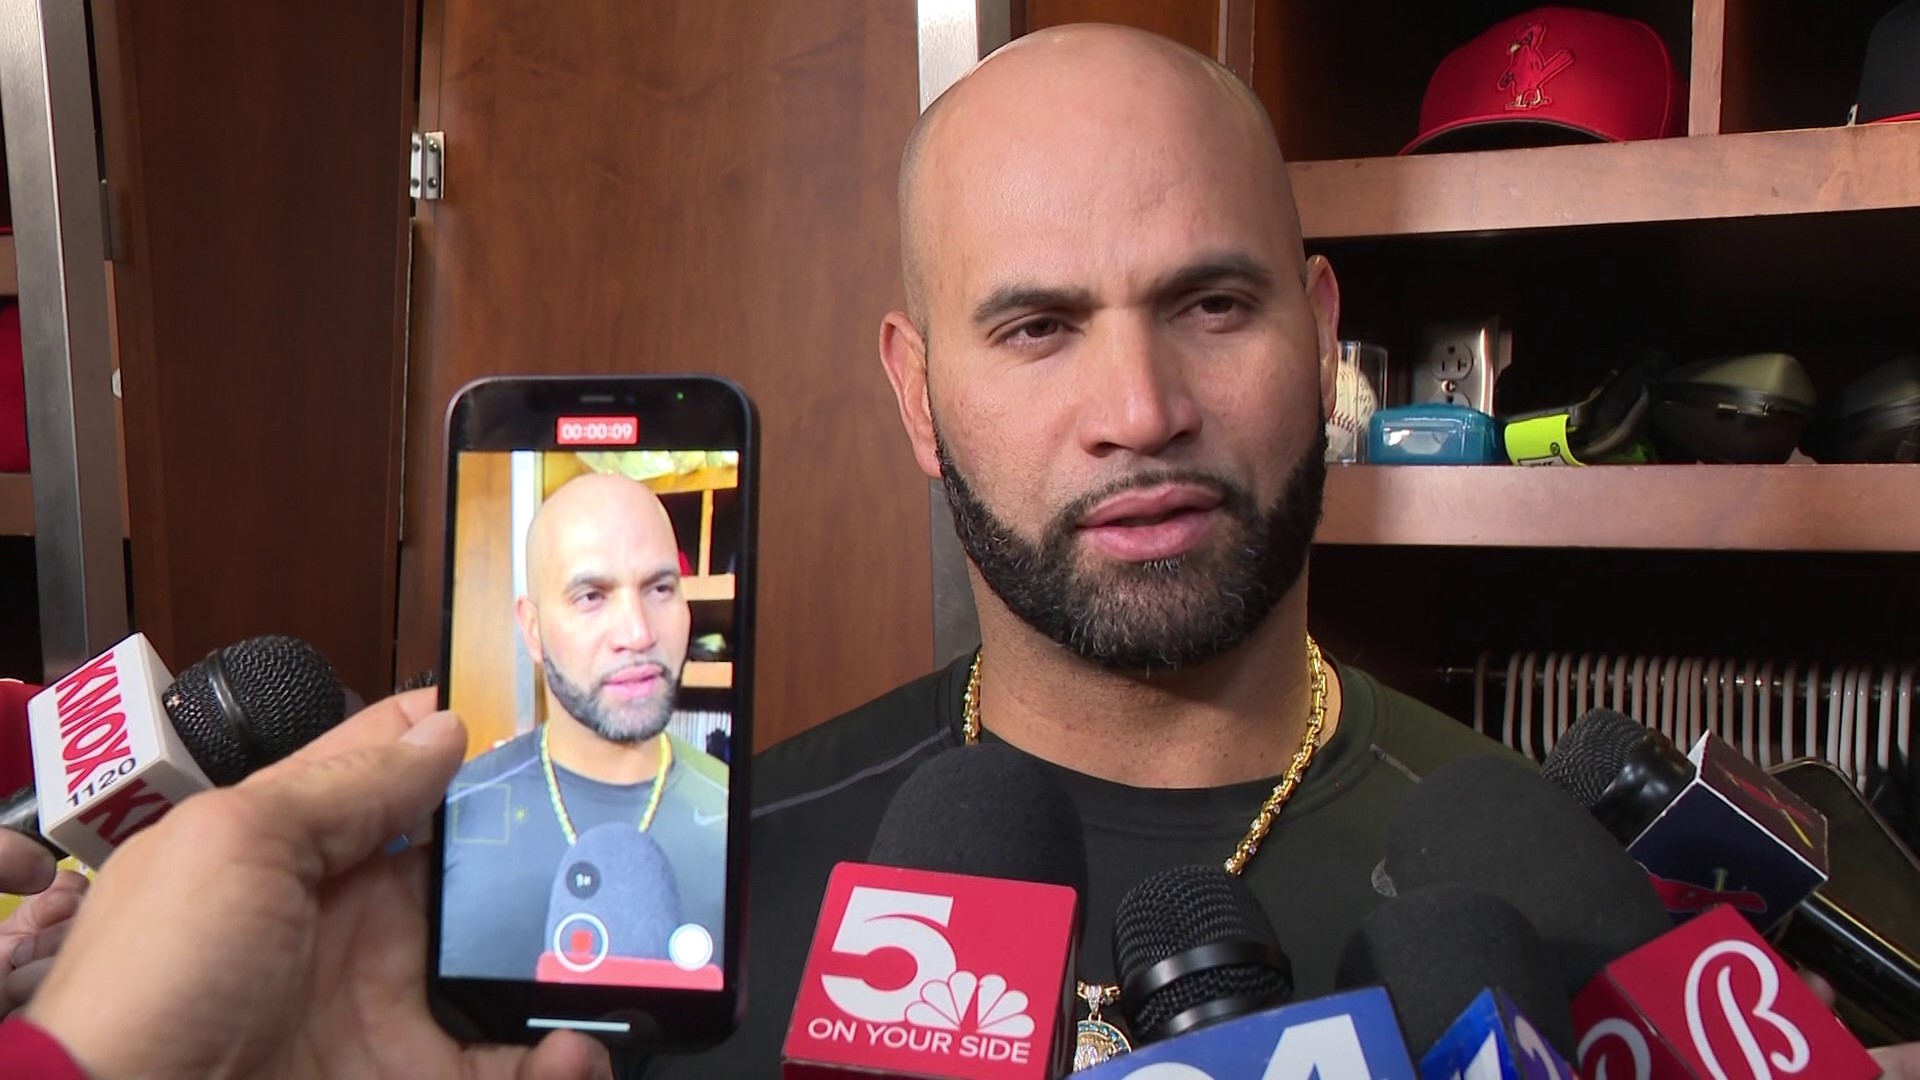 ESPN analyst all but accuses Cardinals' Albert Pujols of cheating